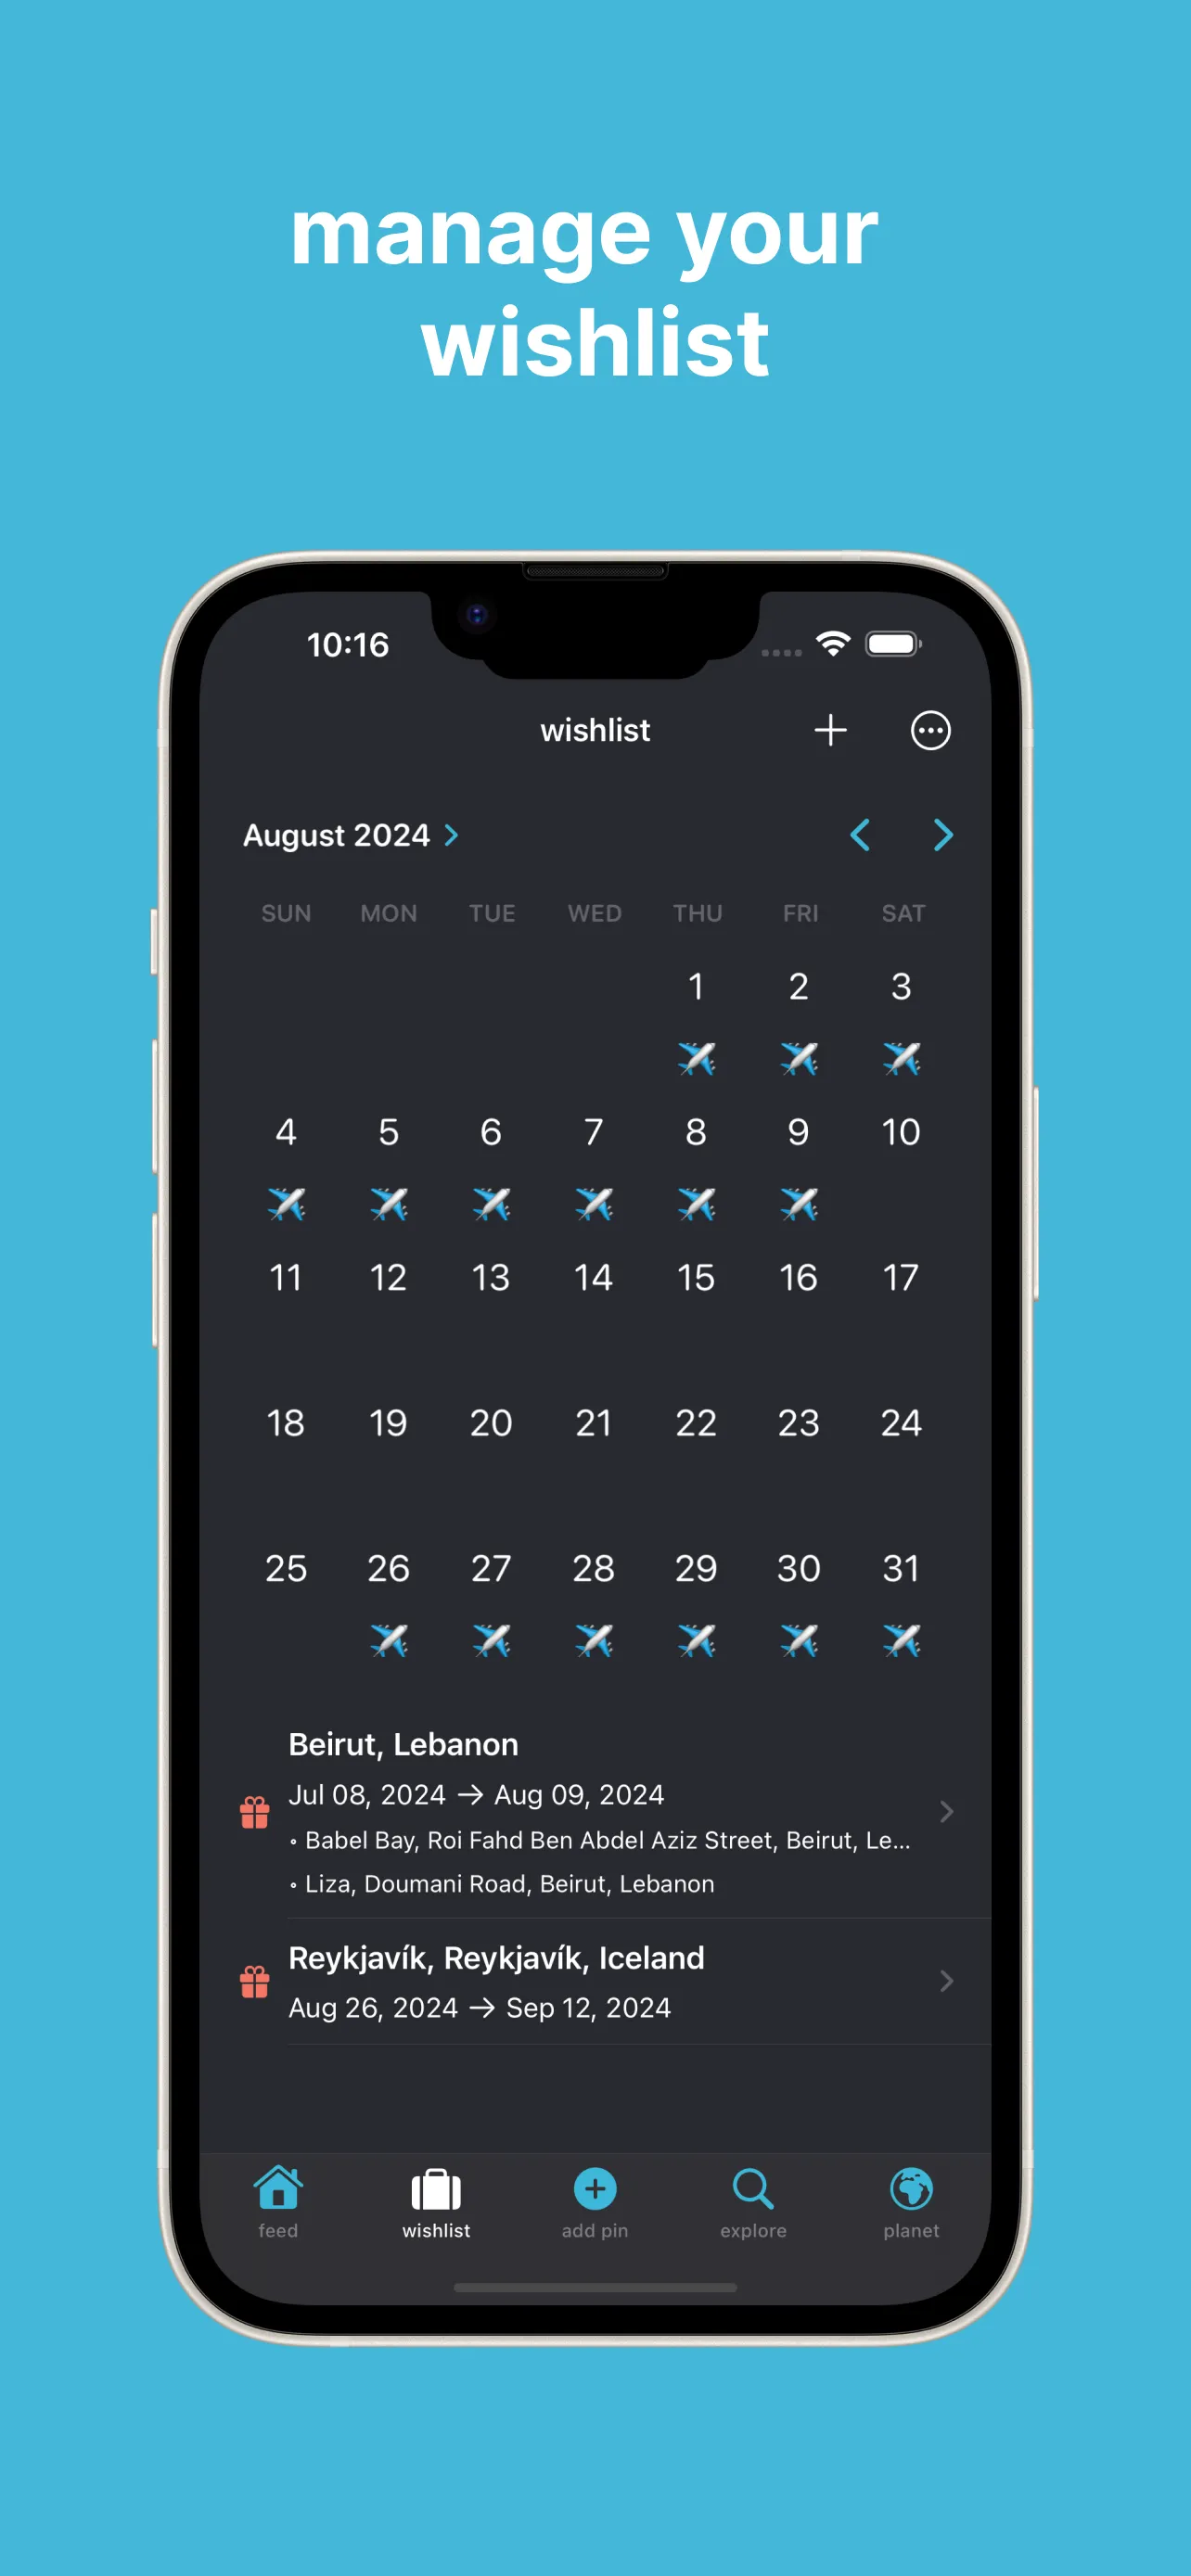 Create your wishlist; The wishlist calendar shows all upcoming trips